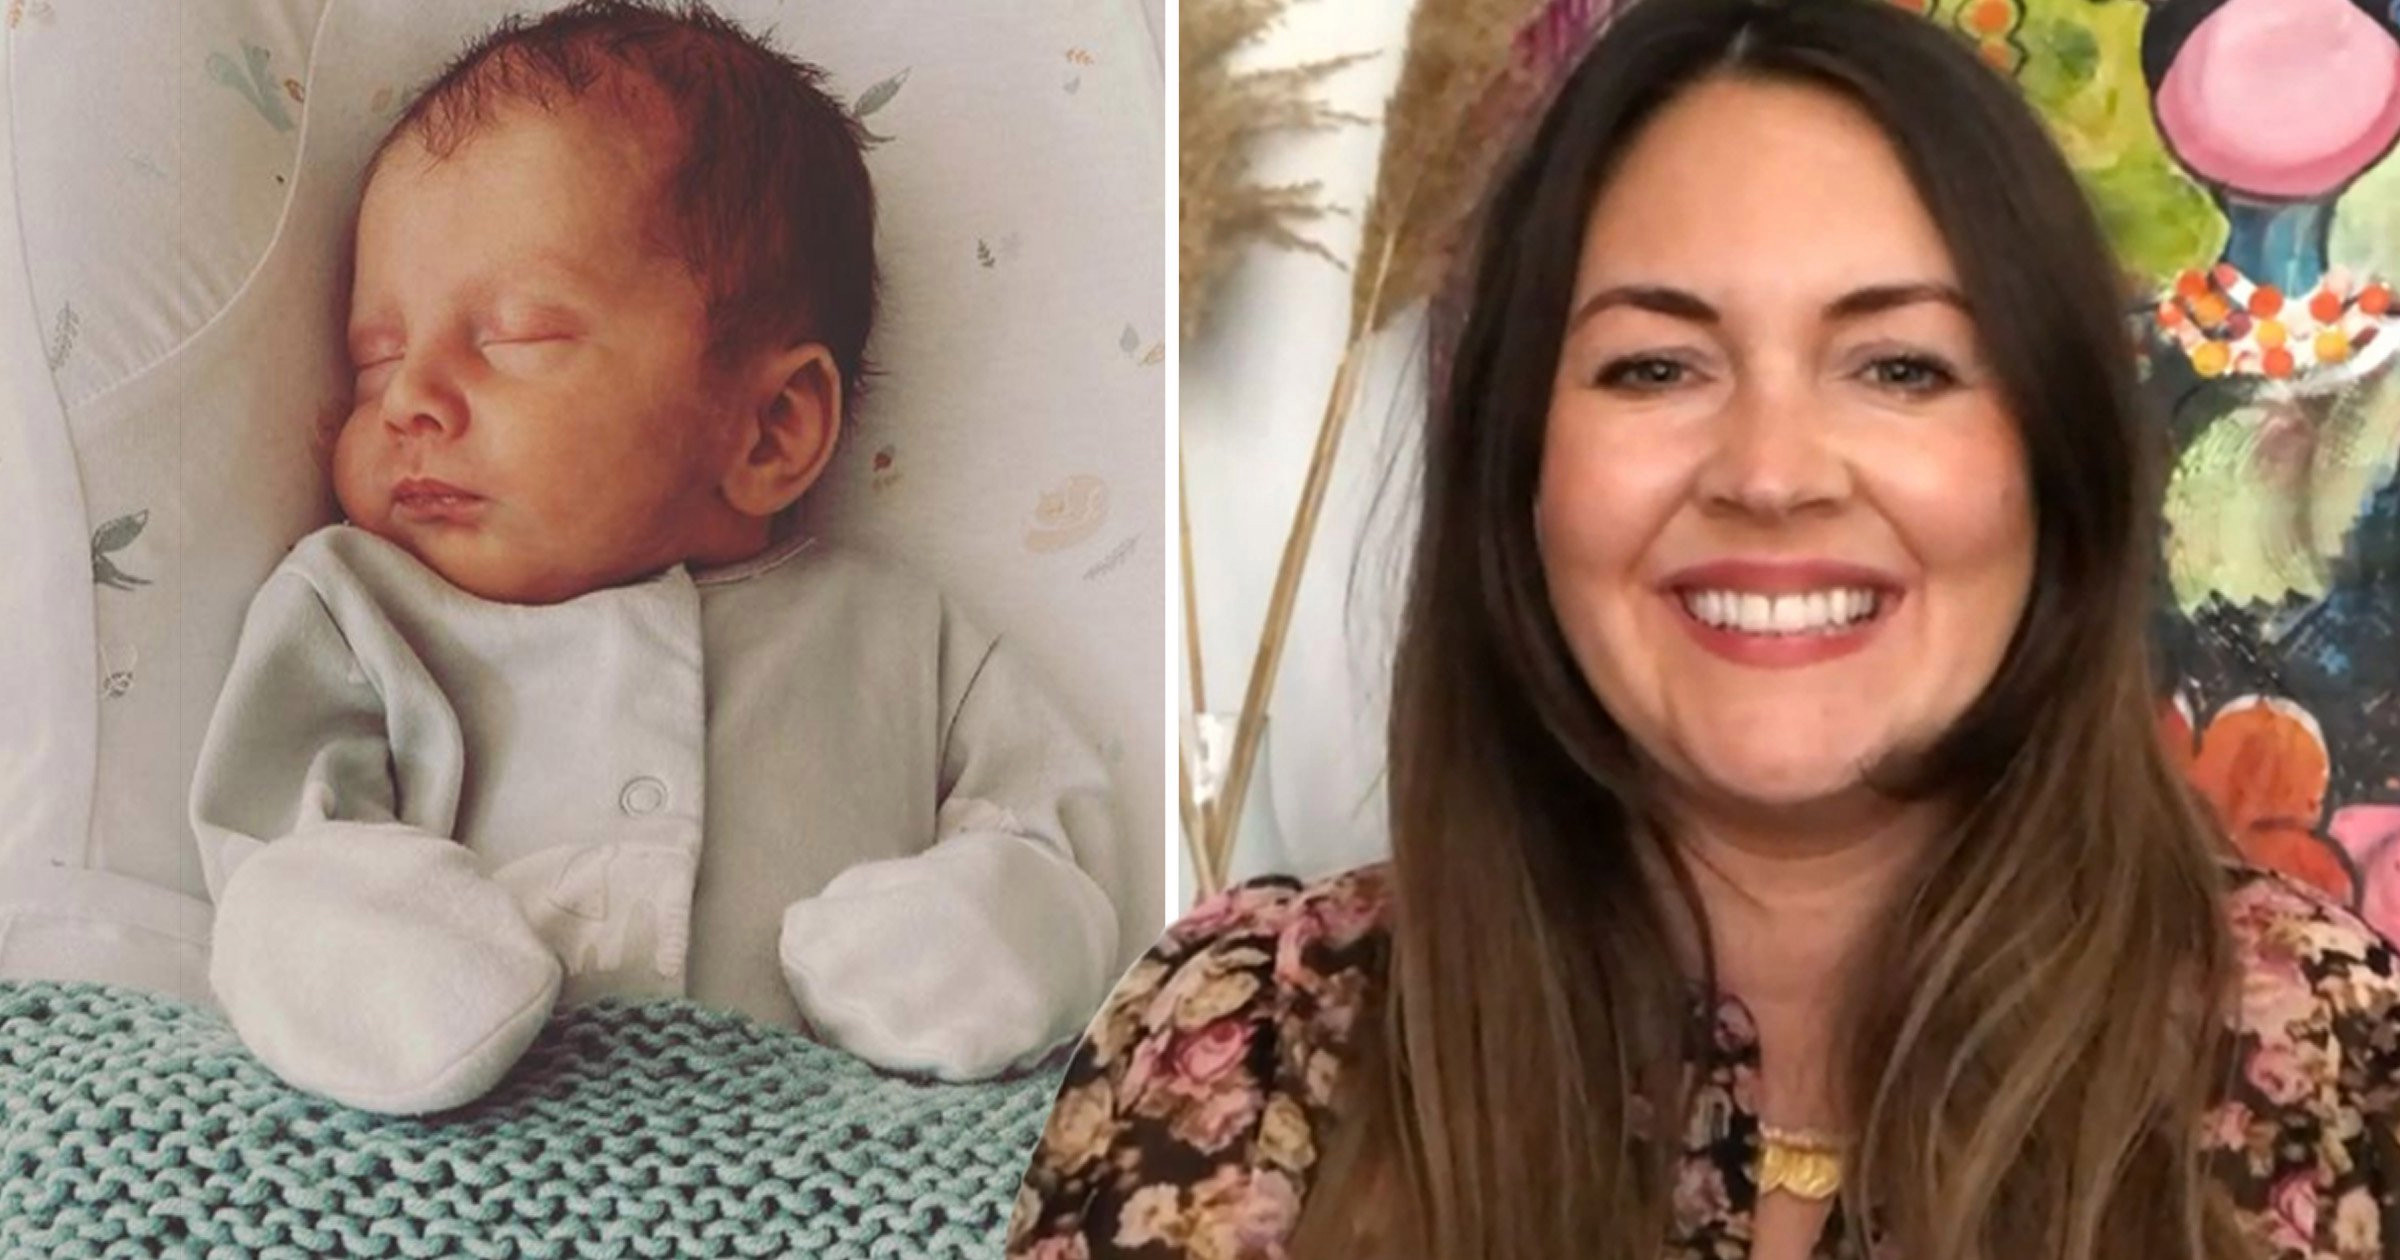 EastEnders’ Lacey Turner shares adorable first photo of son Trilby Fox weeks after giving birth to baby boy